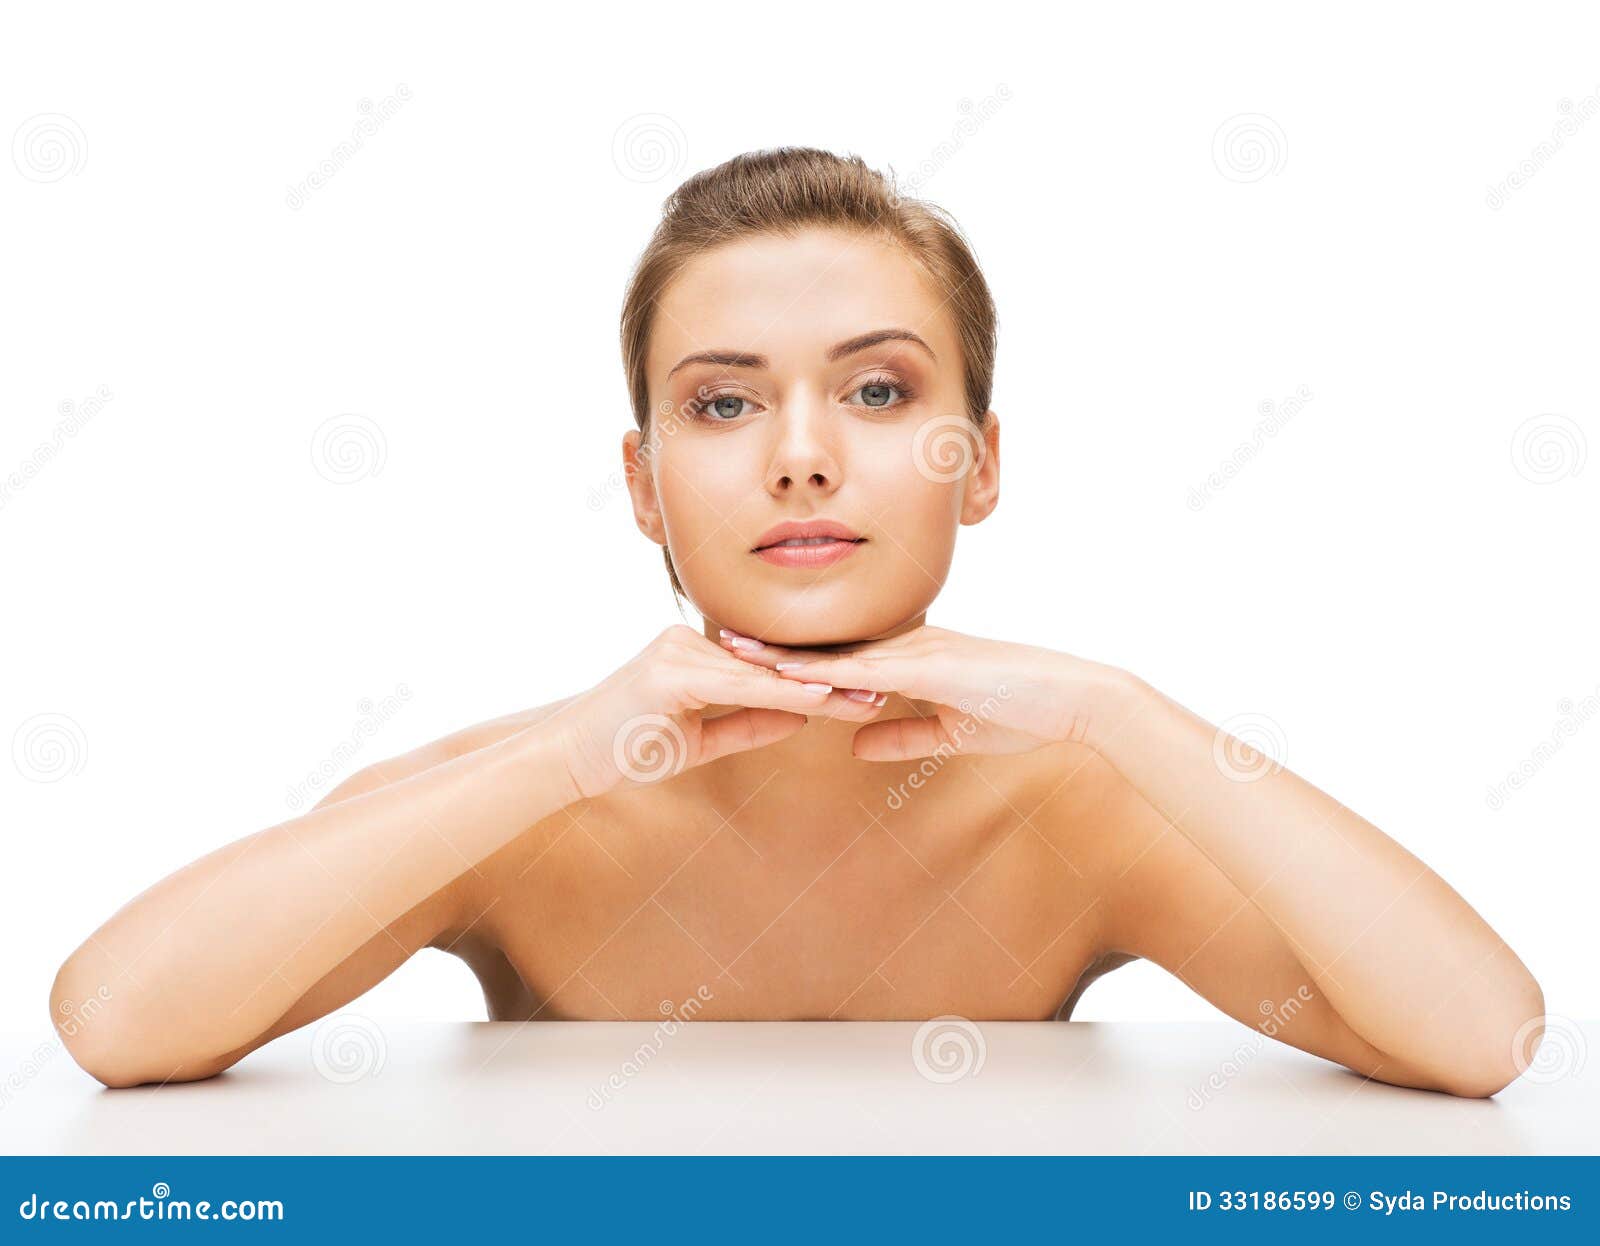 face of woman with clean perfect skin